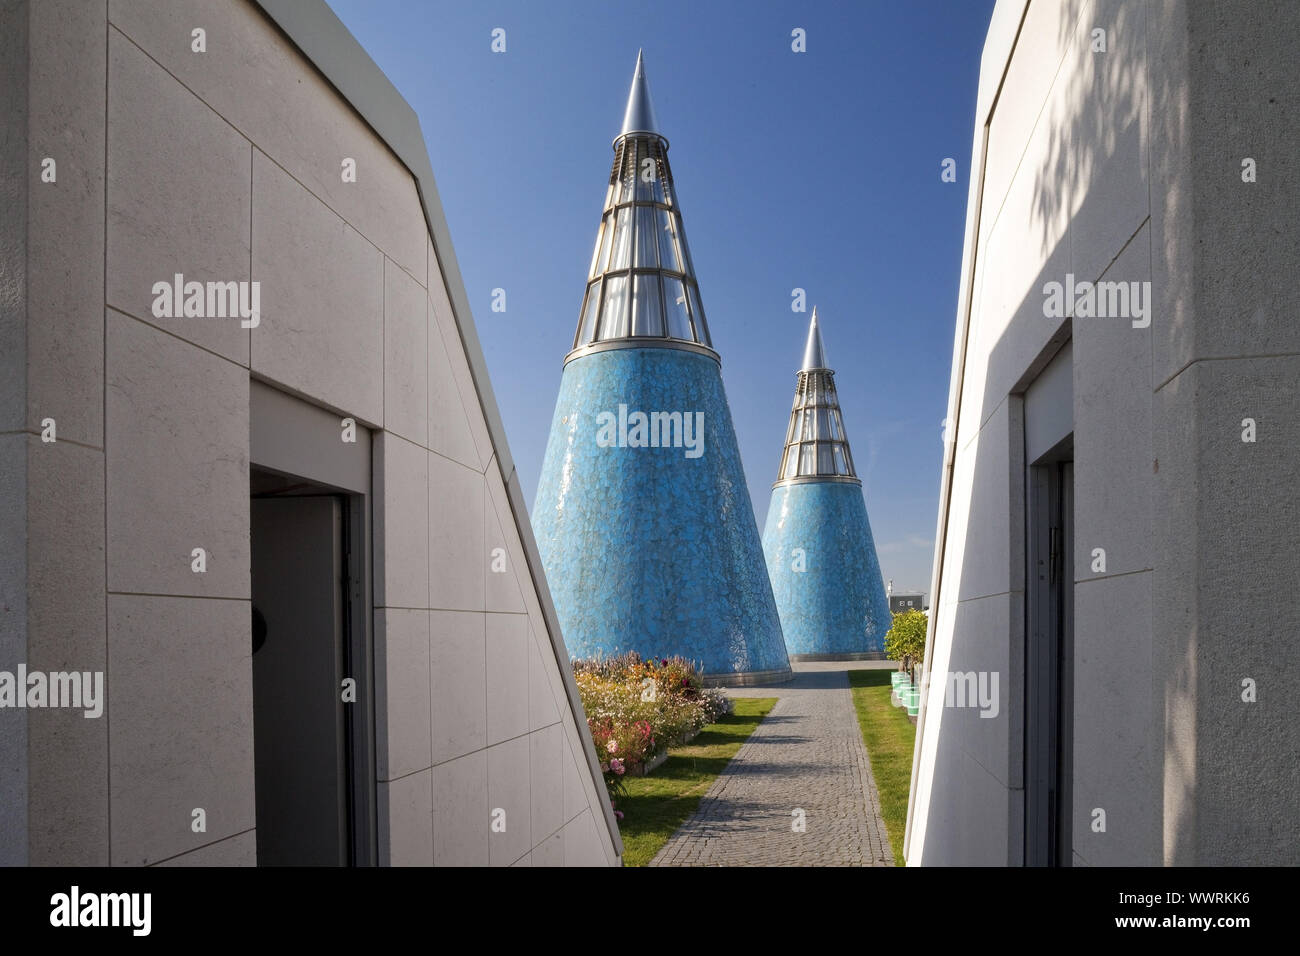 roof garden of the Art and Exhibition Hall with conical light wells, Bonn, Germany Stock Photo